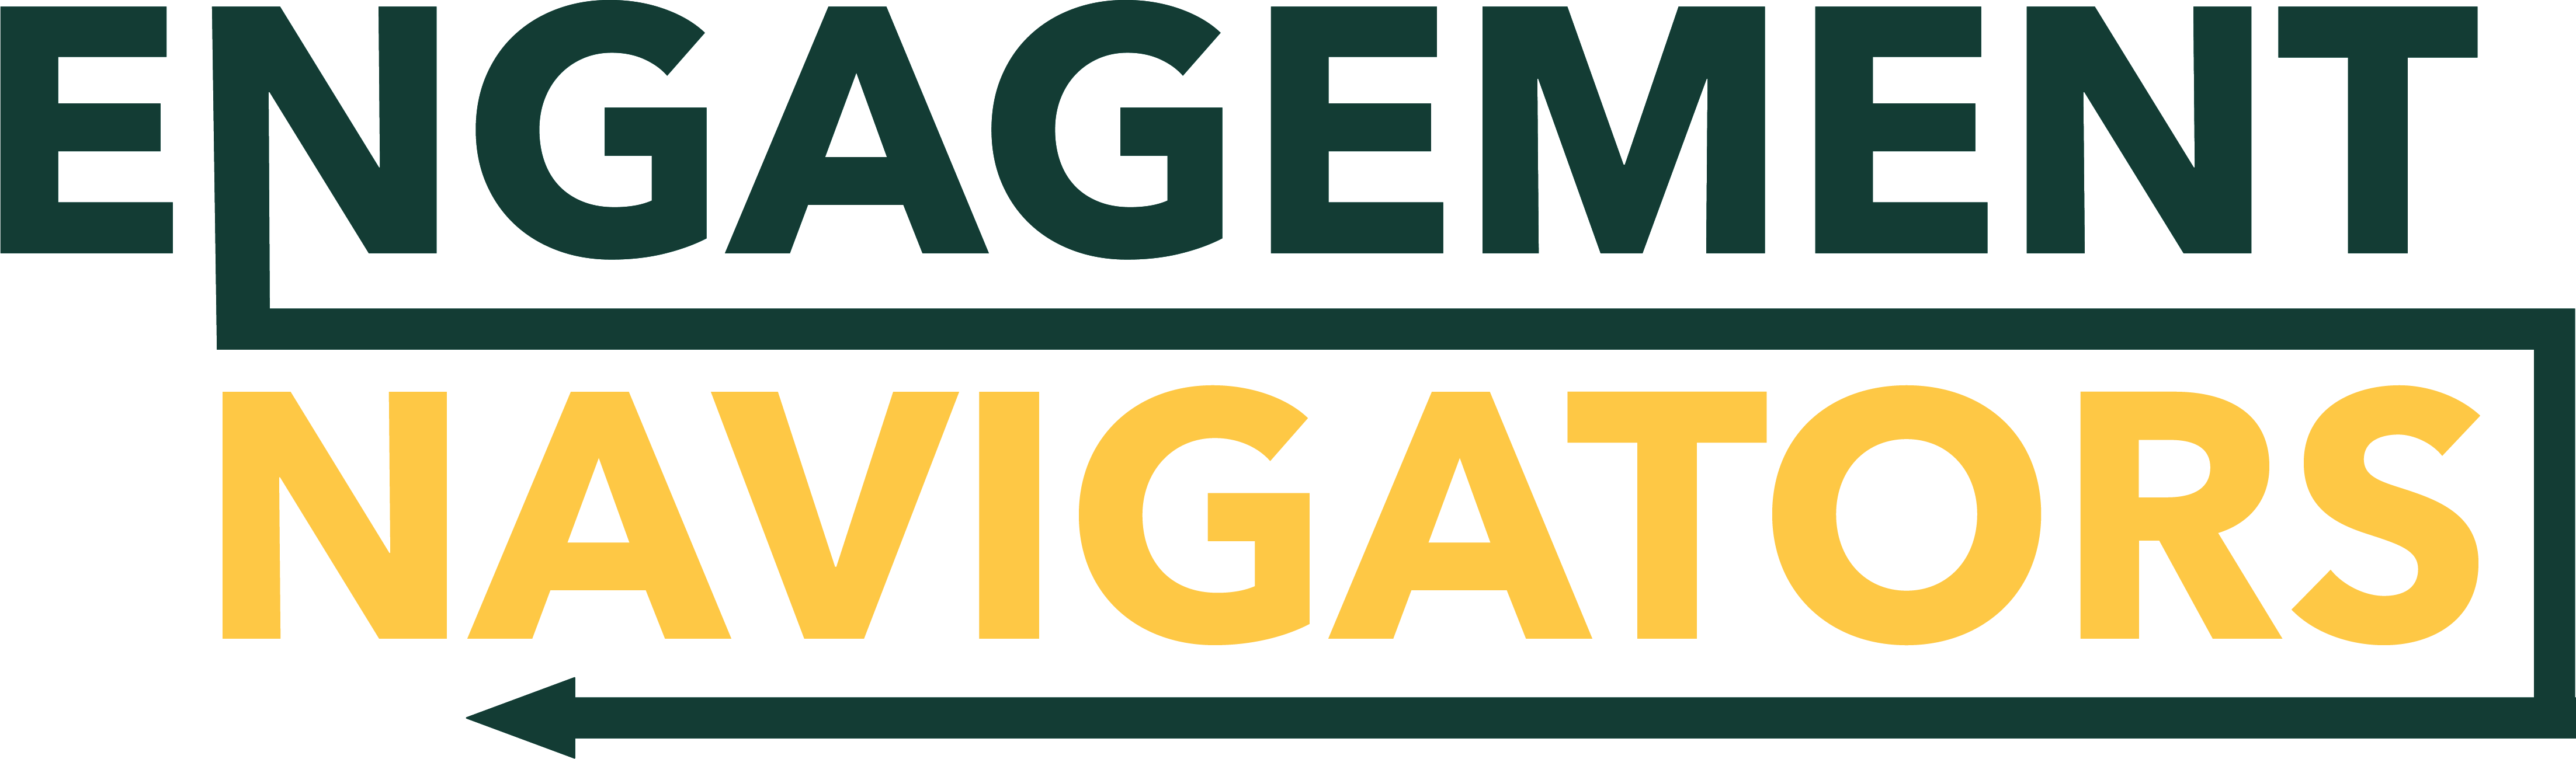 This is the engagement navigator logo